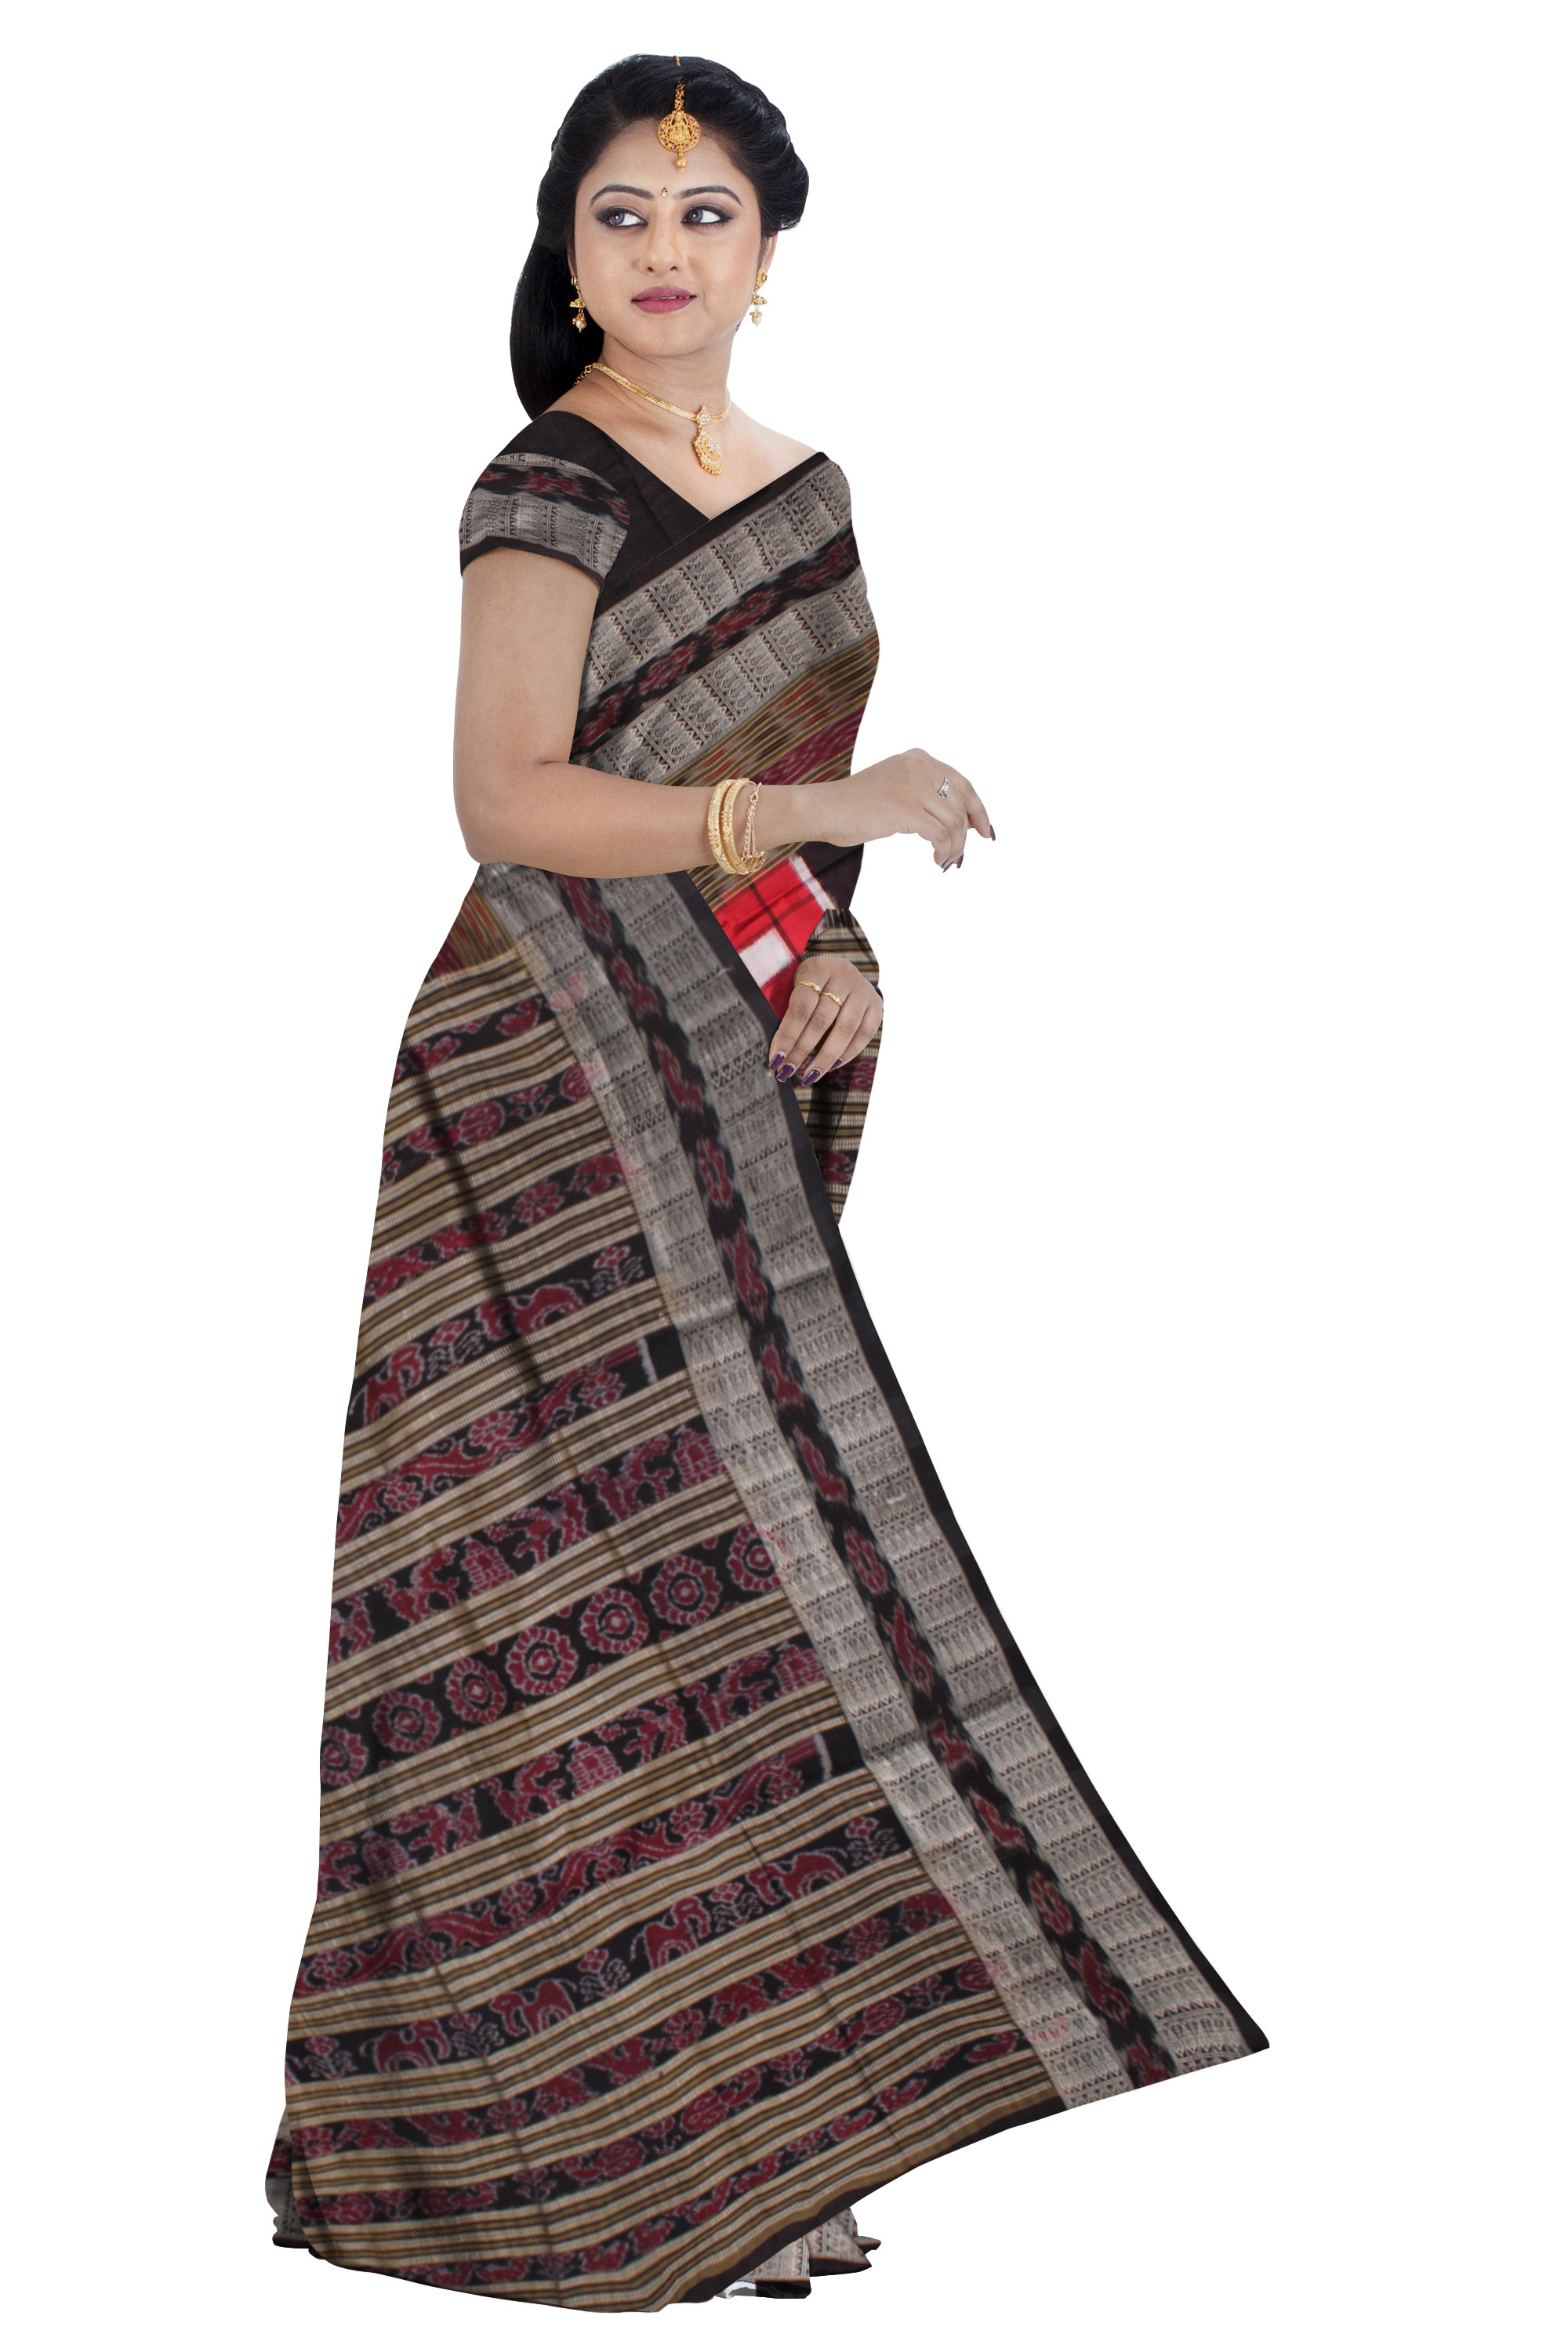 LATEST COLLECTION BICHITRAPURI PURE SILK SAREE IS BLACK AND RED  COLOR BASE,COMES WITH MATCHING BLOUSE PIECE, - Koshali Arts & Crafts Enterprise